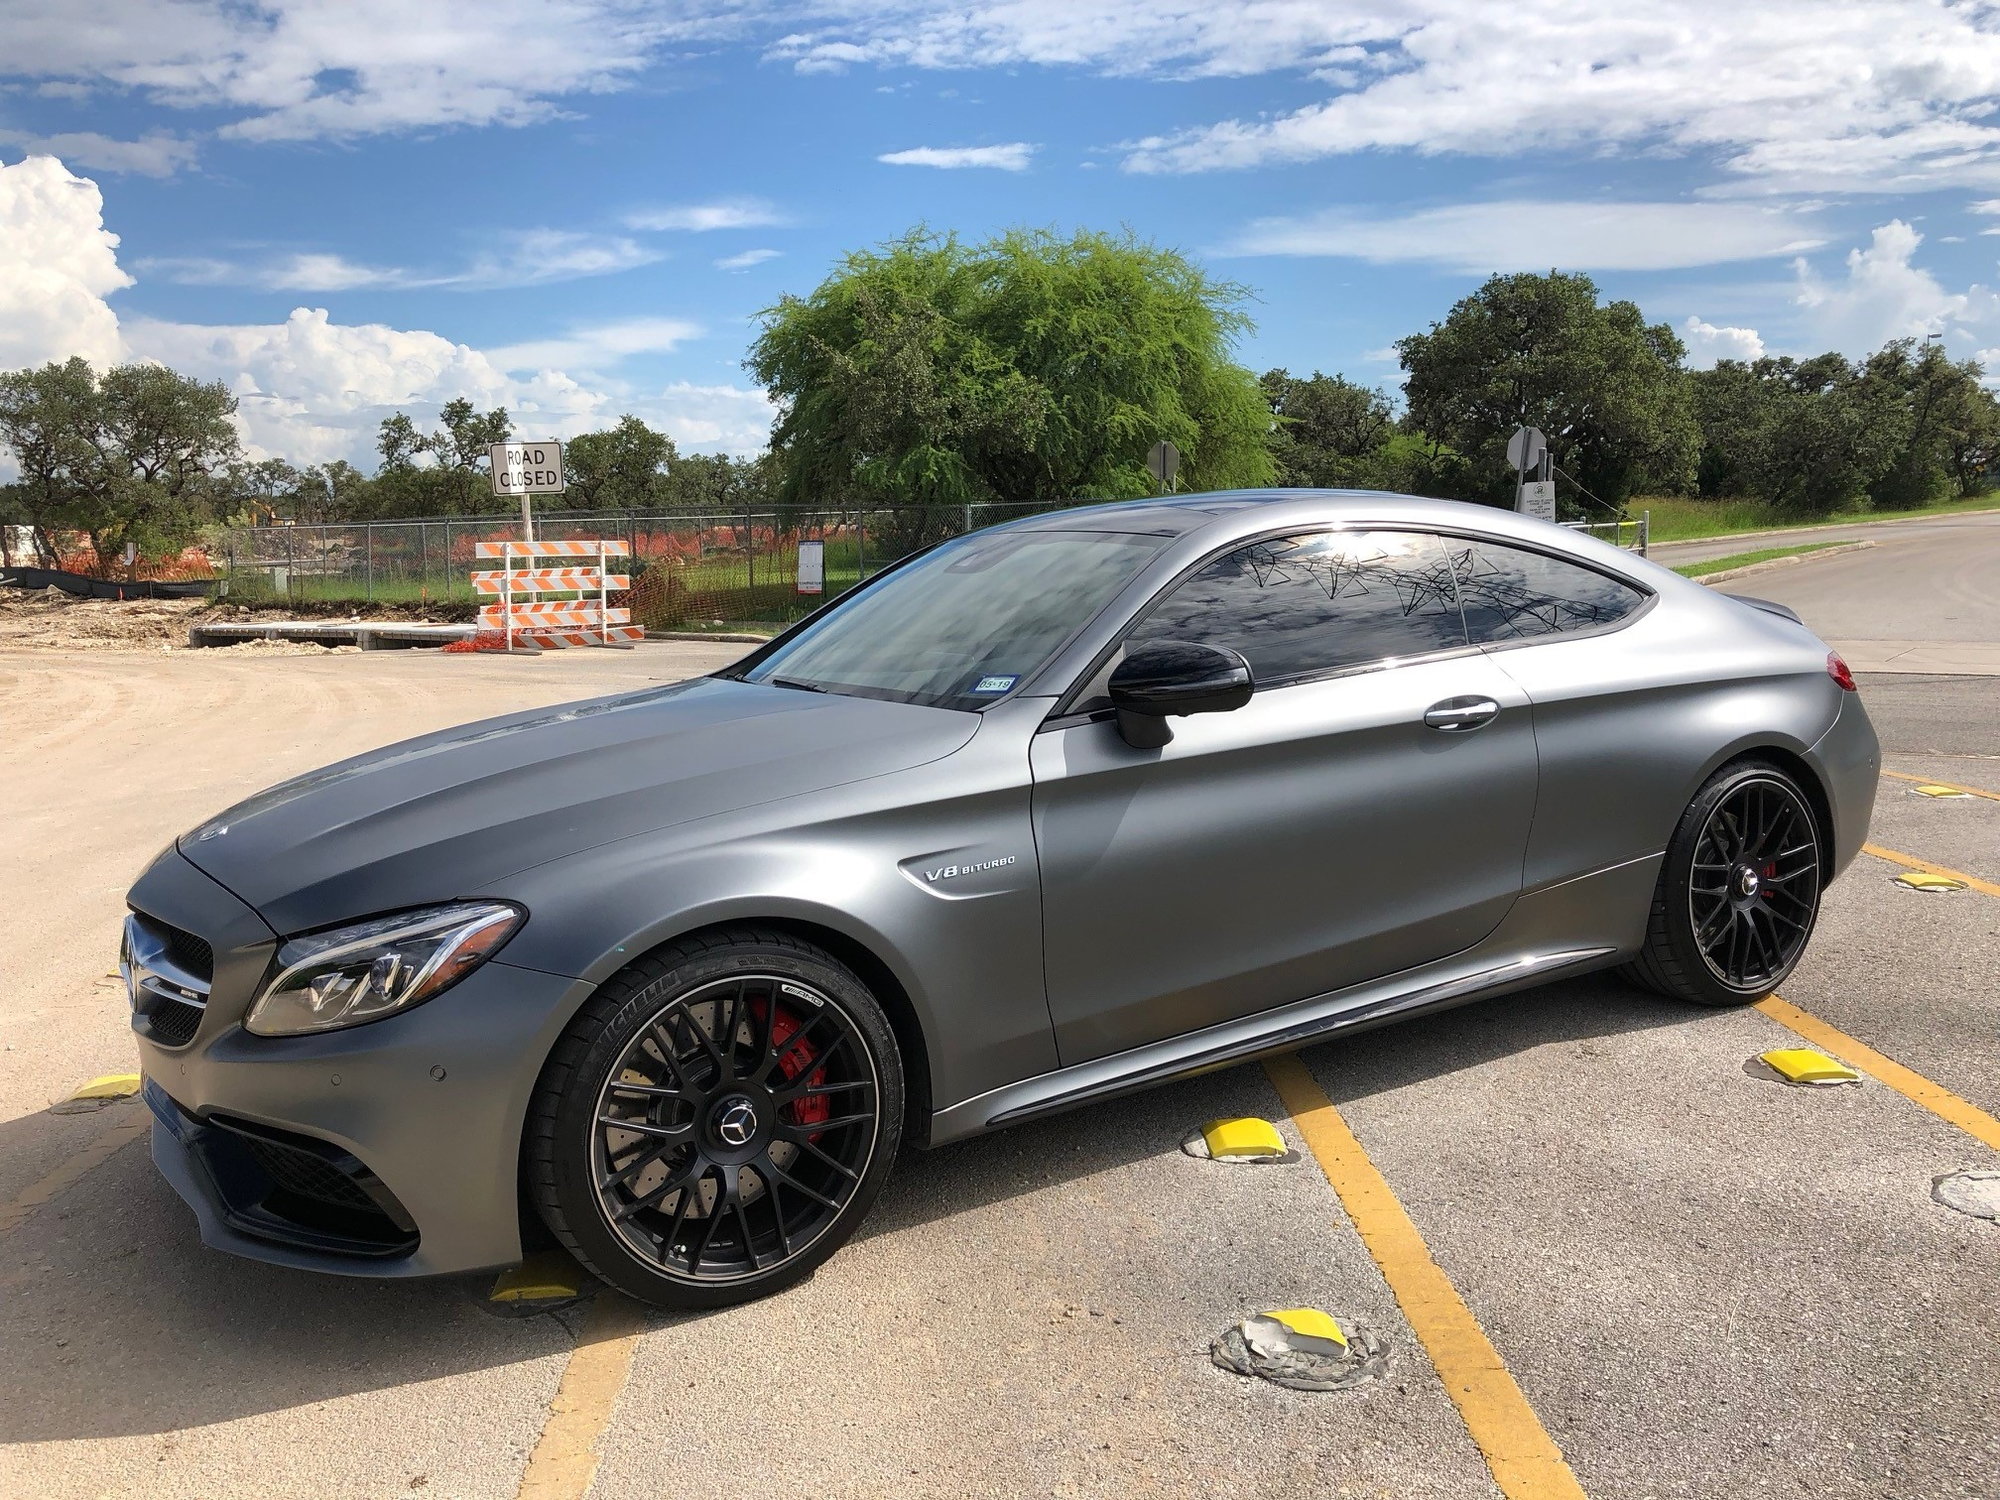 2018 Mercedes-Benz C63 AMG S - 2018 Mercedes Benz C63 S AMG Grey Magno Coupe $5k in XPEL PPF Tint Power upgrade - Used - VIN WDDWJ8HB8JF644670 - 4,600 Miles - 8 cyl - 2WD - Automatic - Coupe - Gray - San Antonio, TX 78248, United States